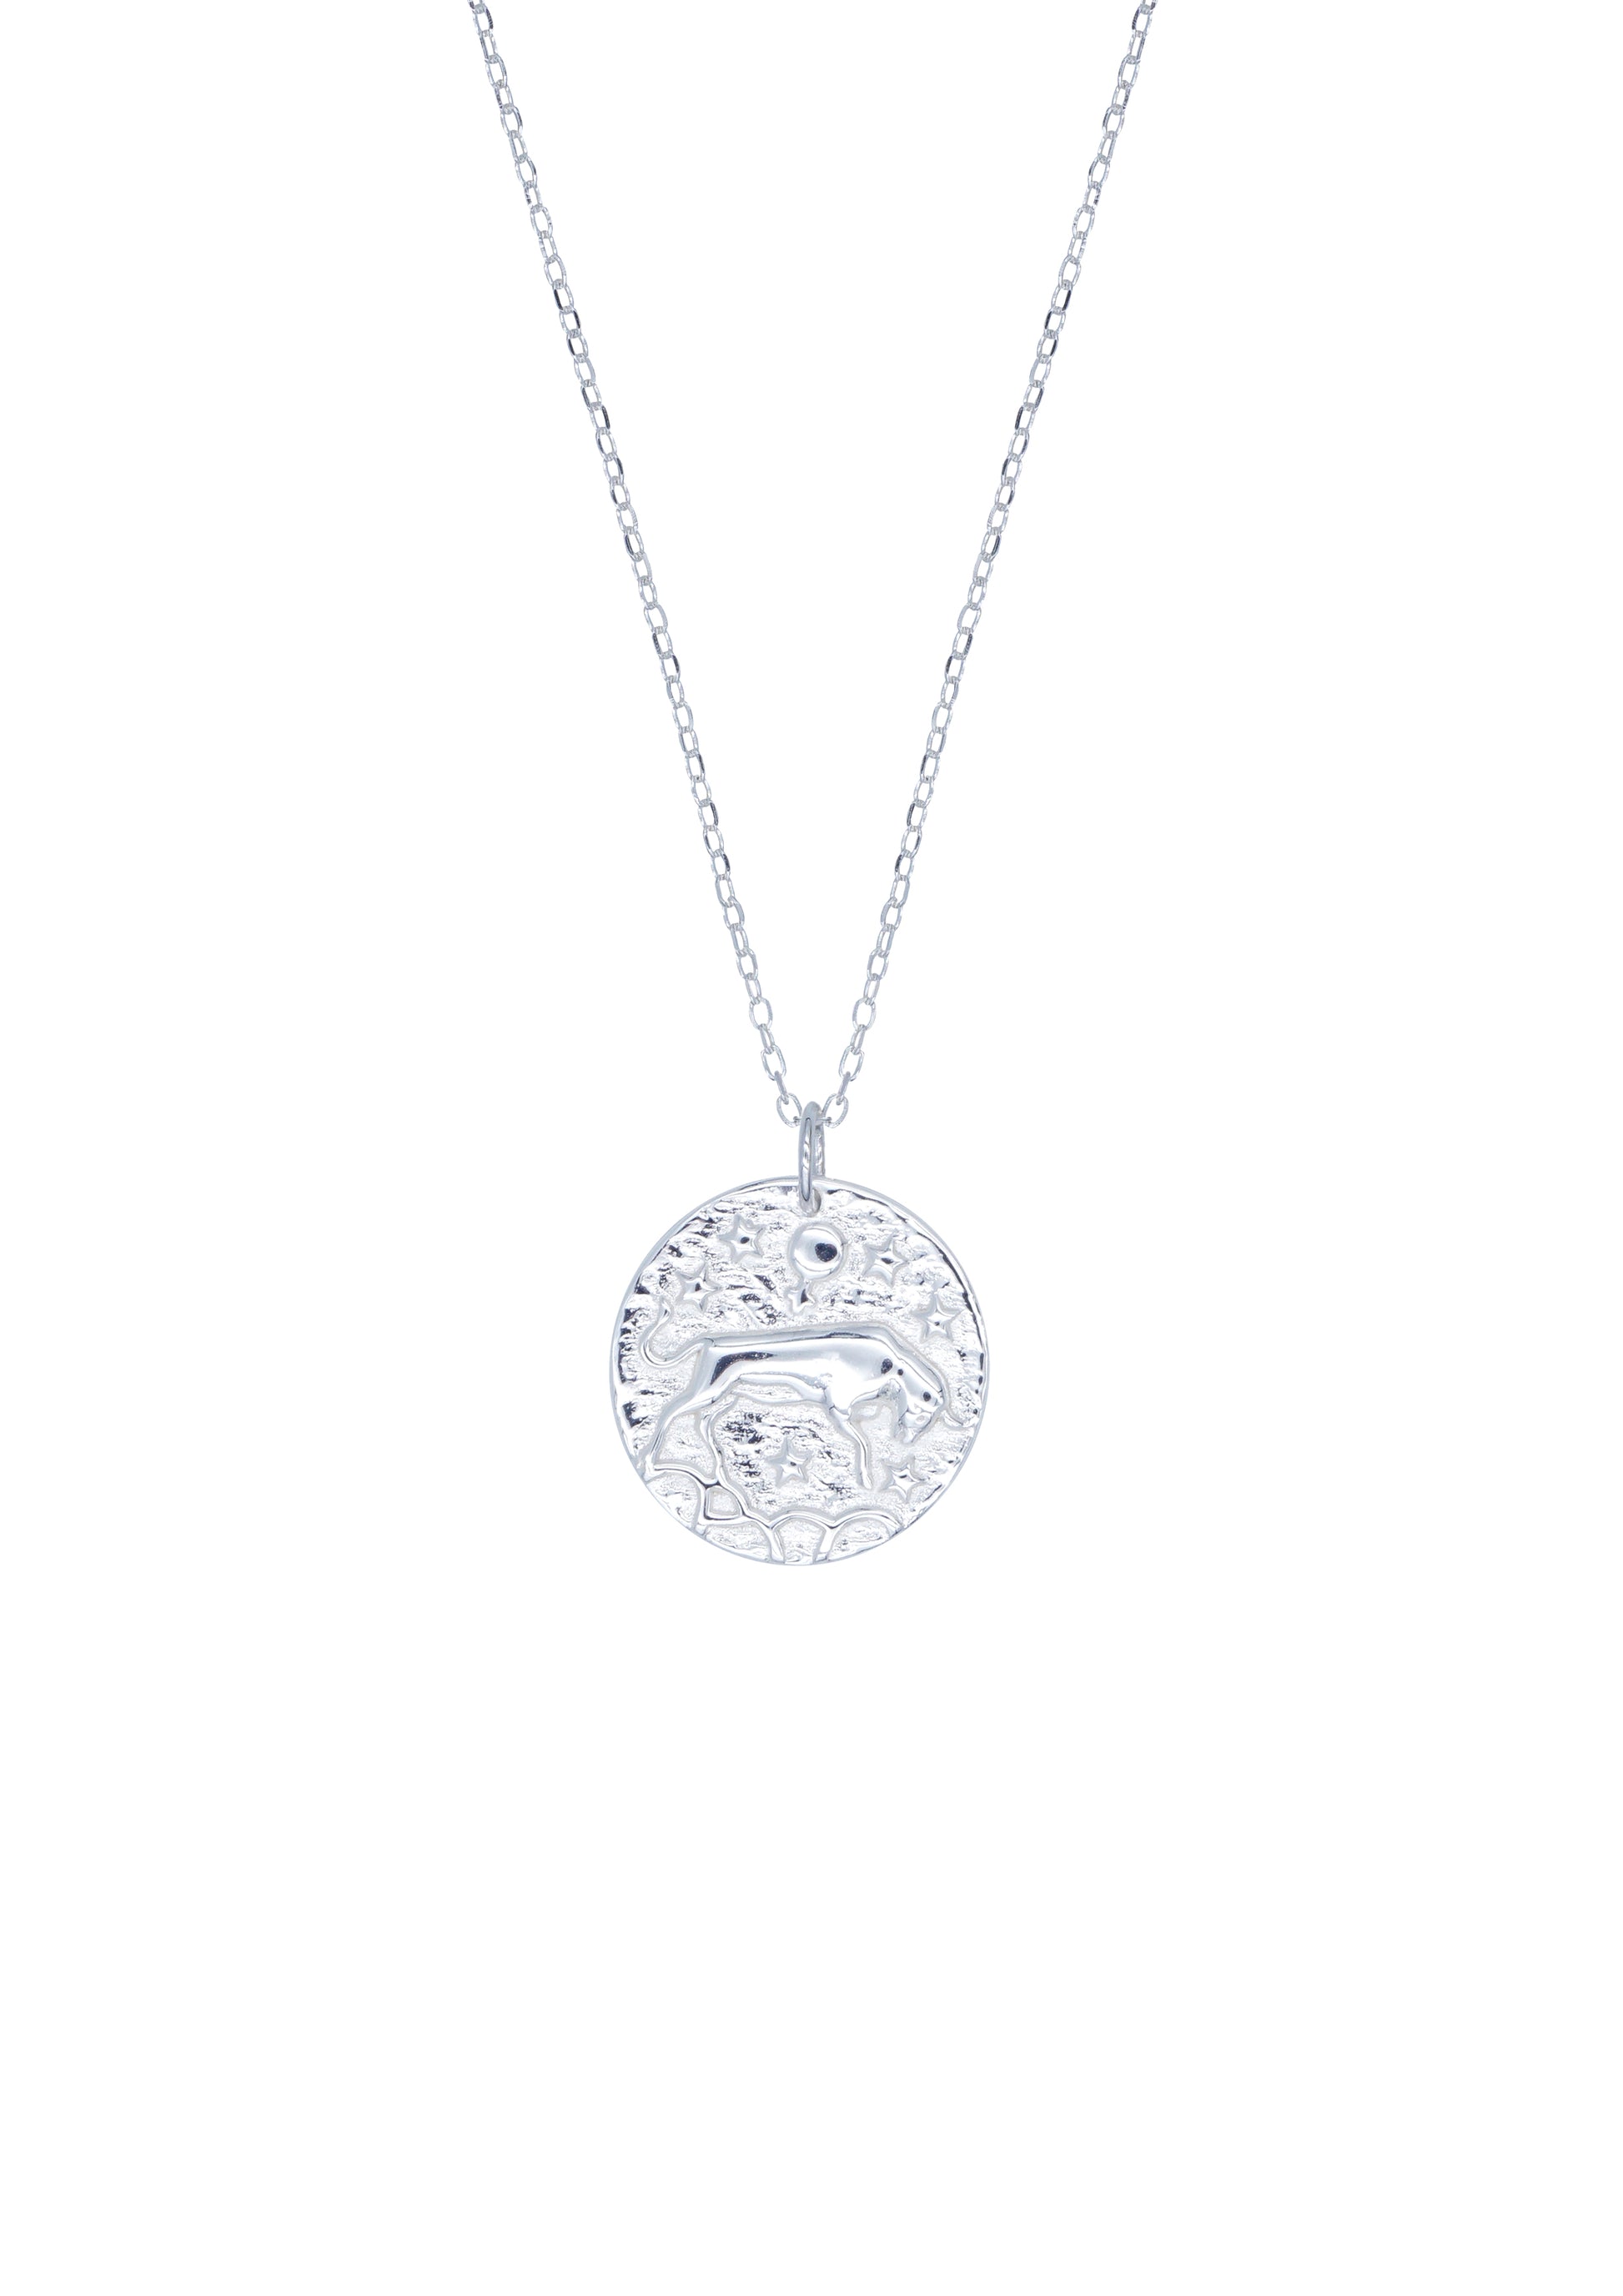 Taurus Necklace Silver - ISSHU